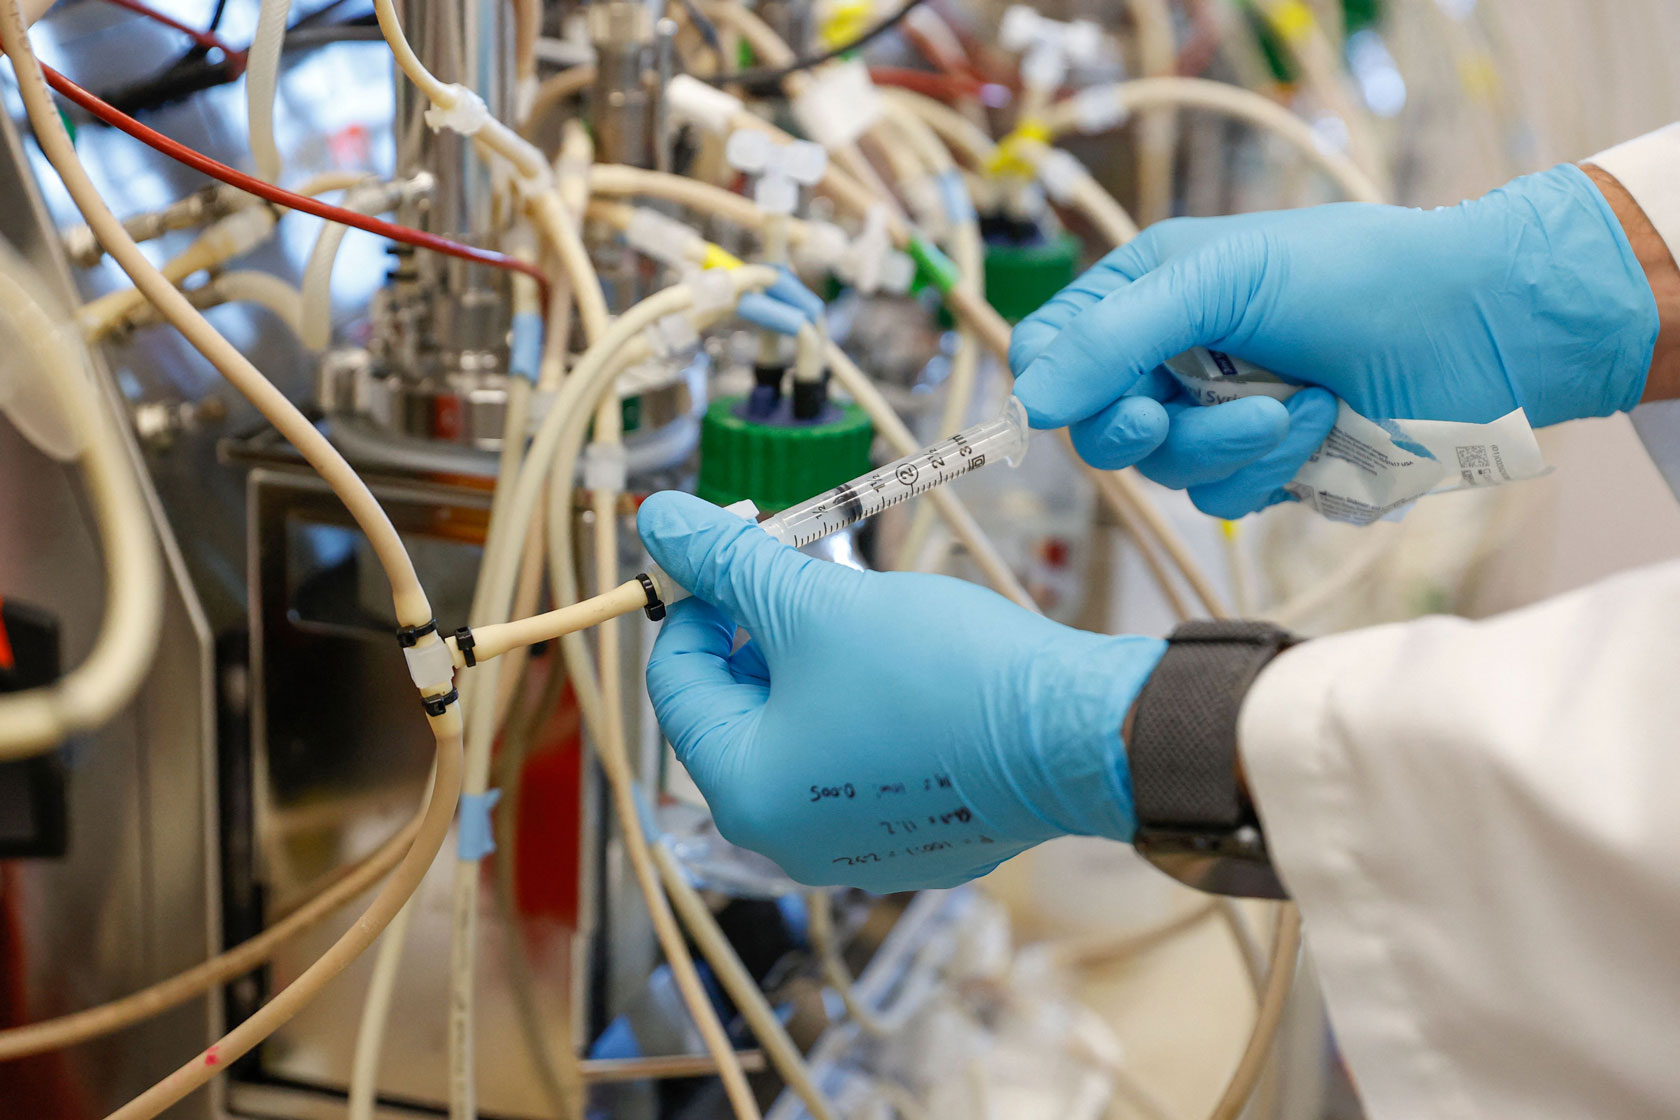 Photo shows hands wearing blue gloves using a syringe to add a liquid to thin tubes.